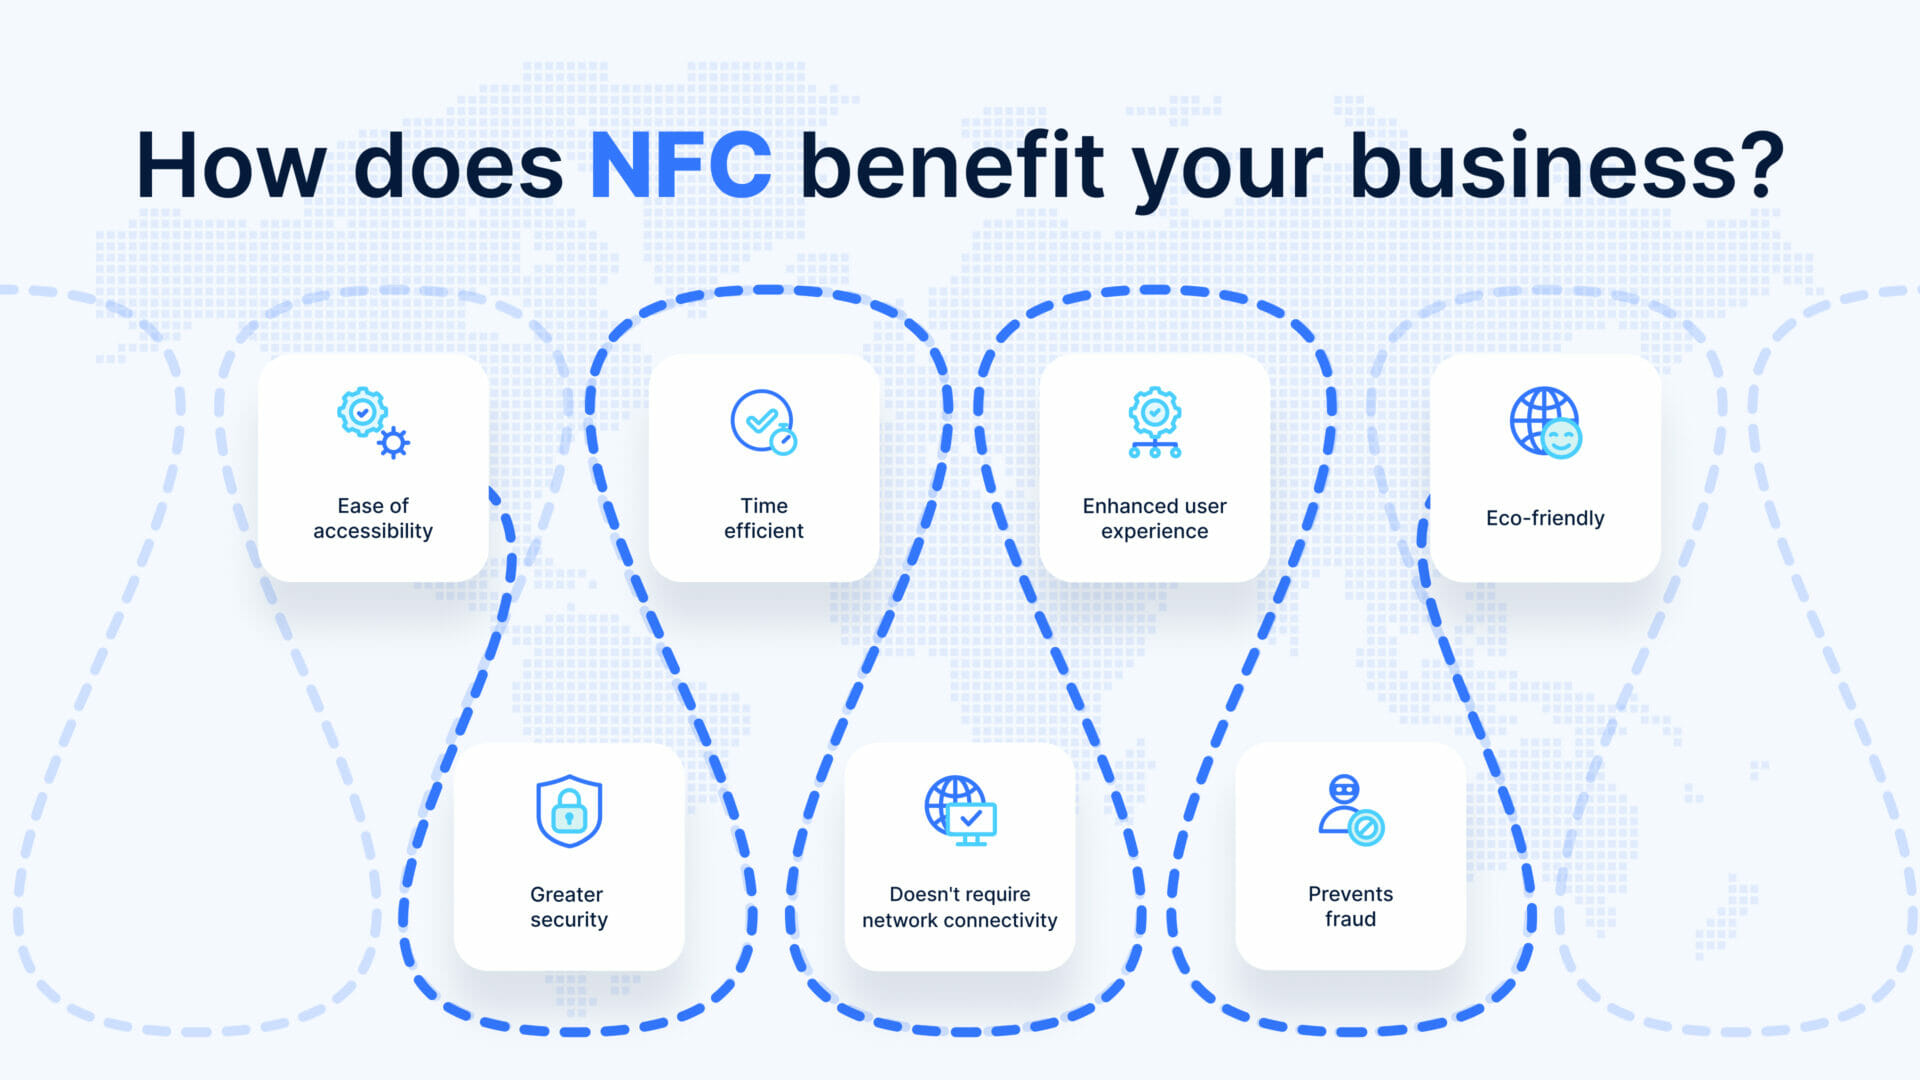 What are the benefits of NFC